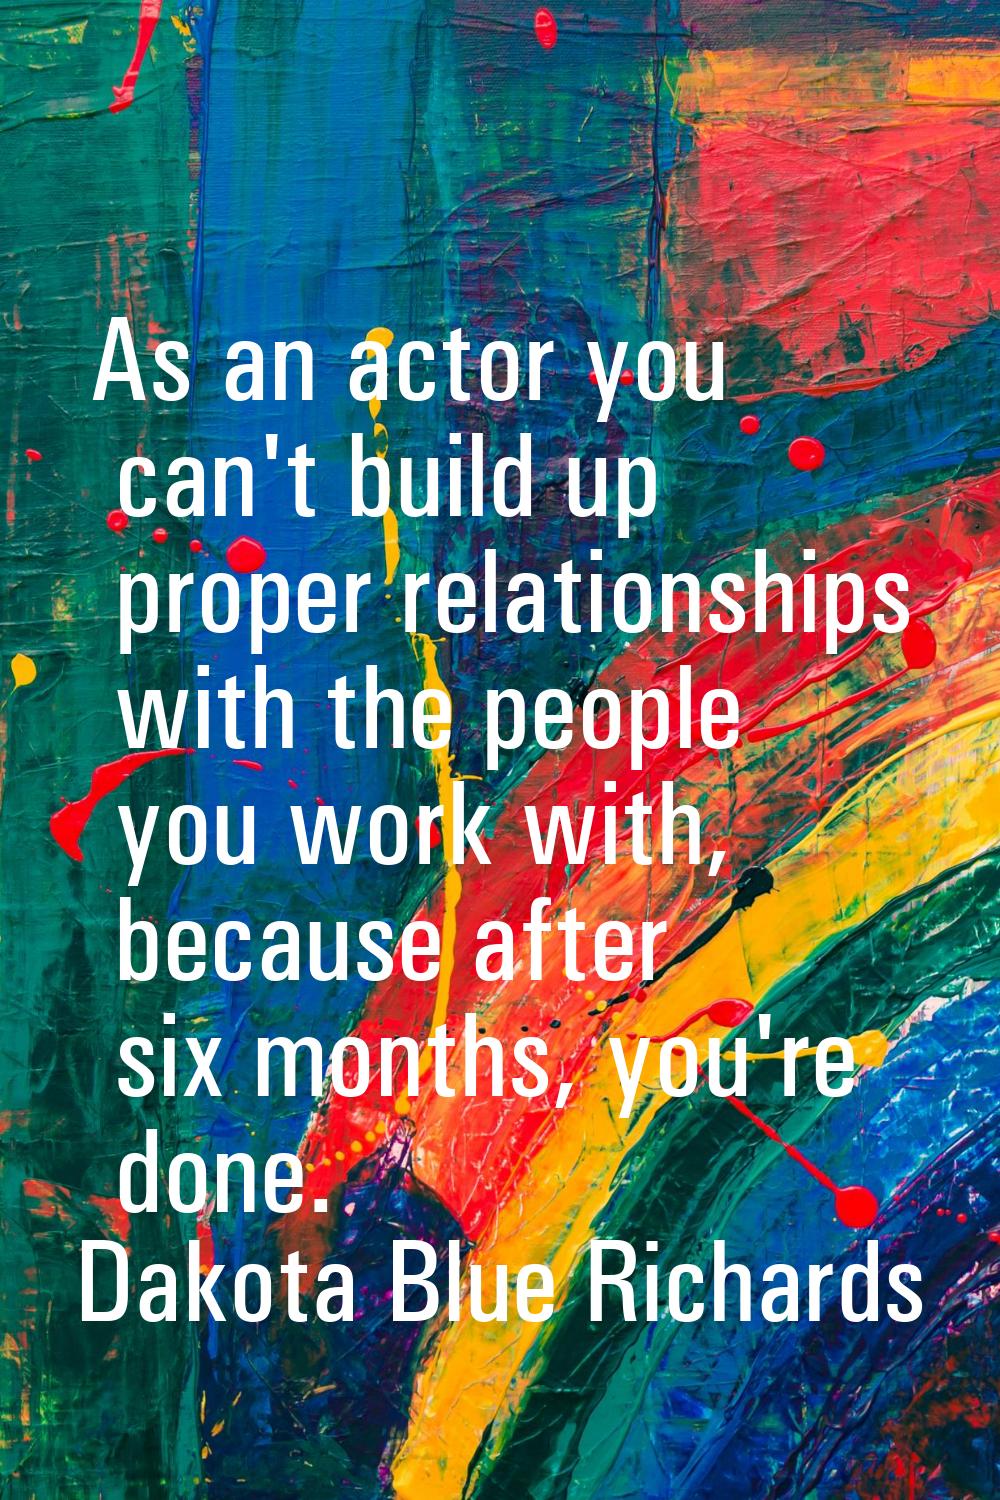 As an actor you can't build up proper relationships with the people you work with, because after si